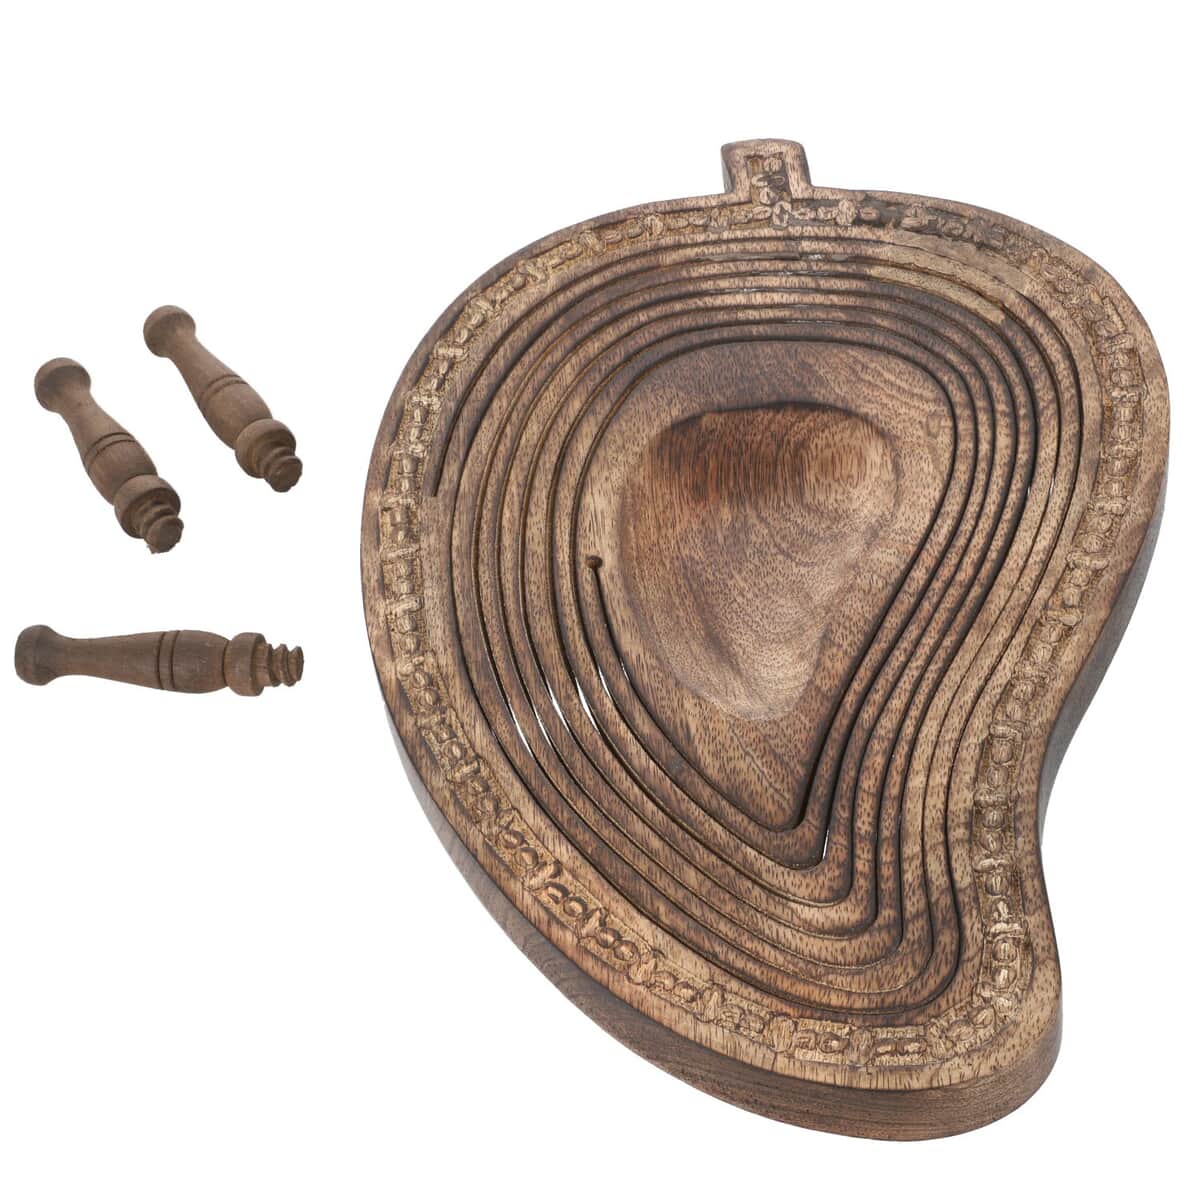 Mango Shape Hand carved Wooden Spring Tray with Small Legs, COLOR: Natural brown image number 0